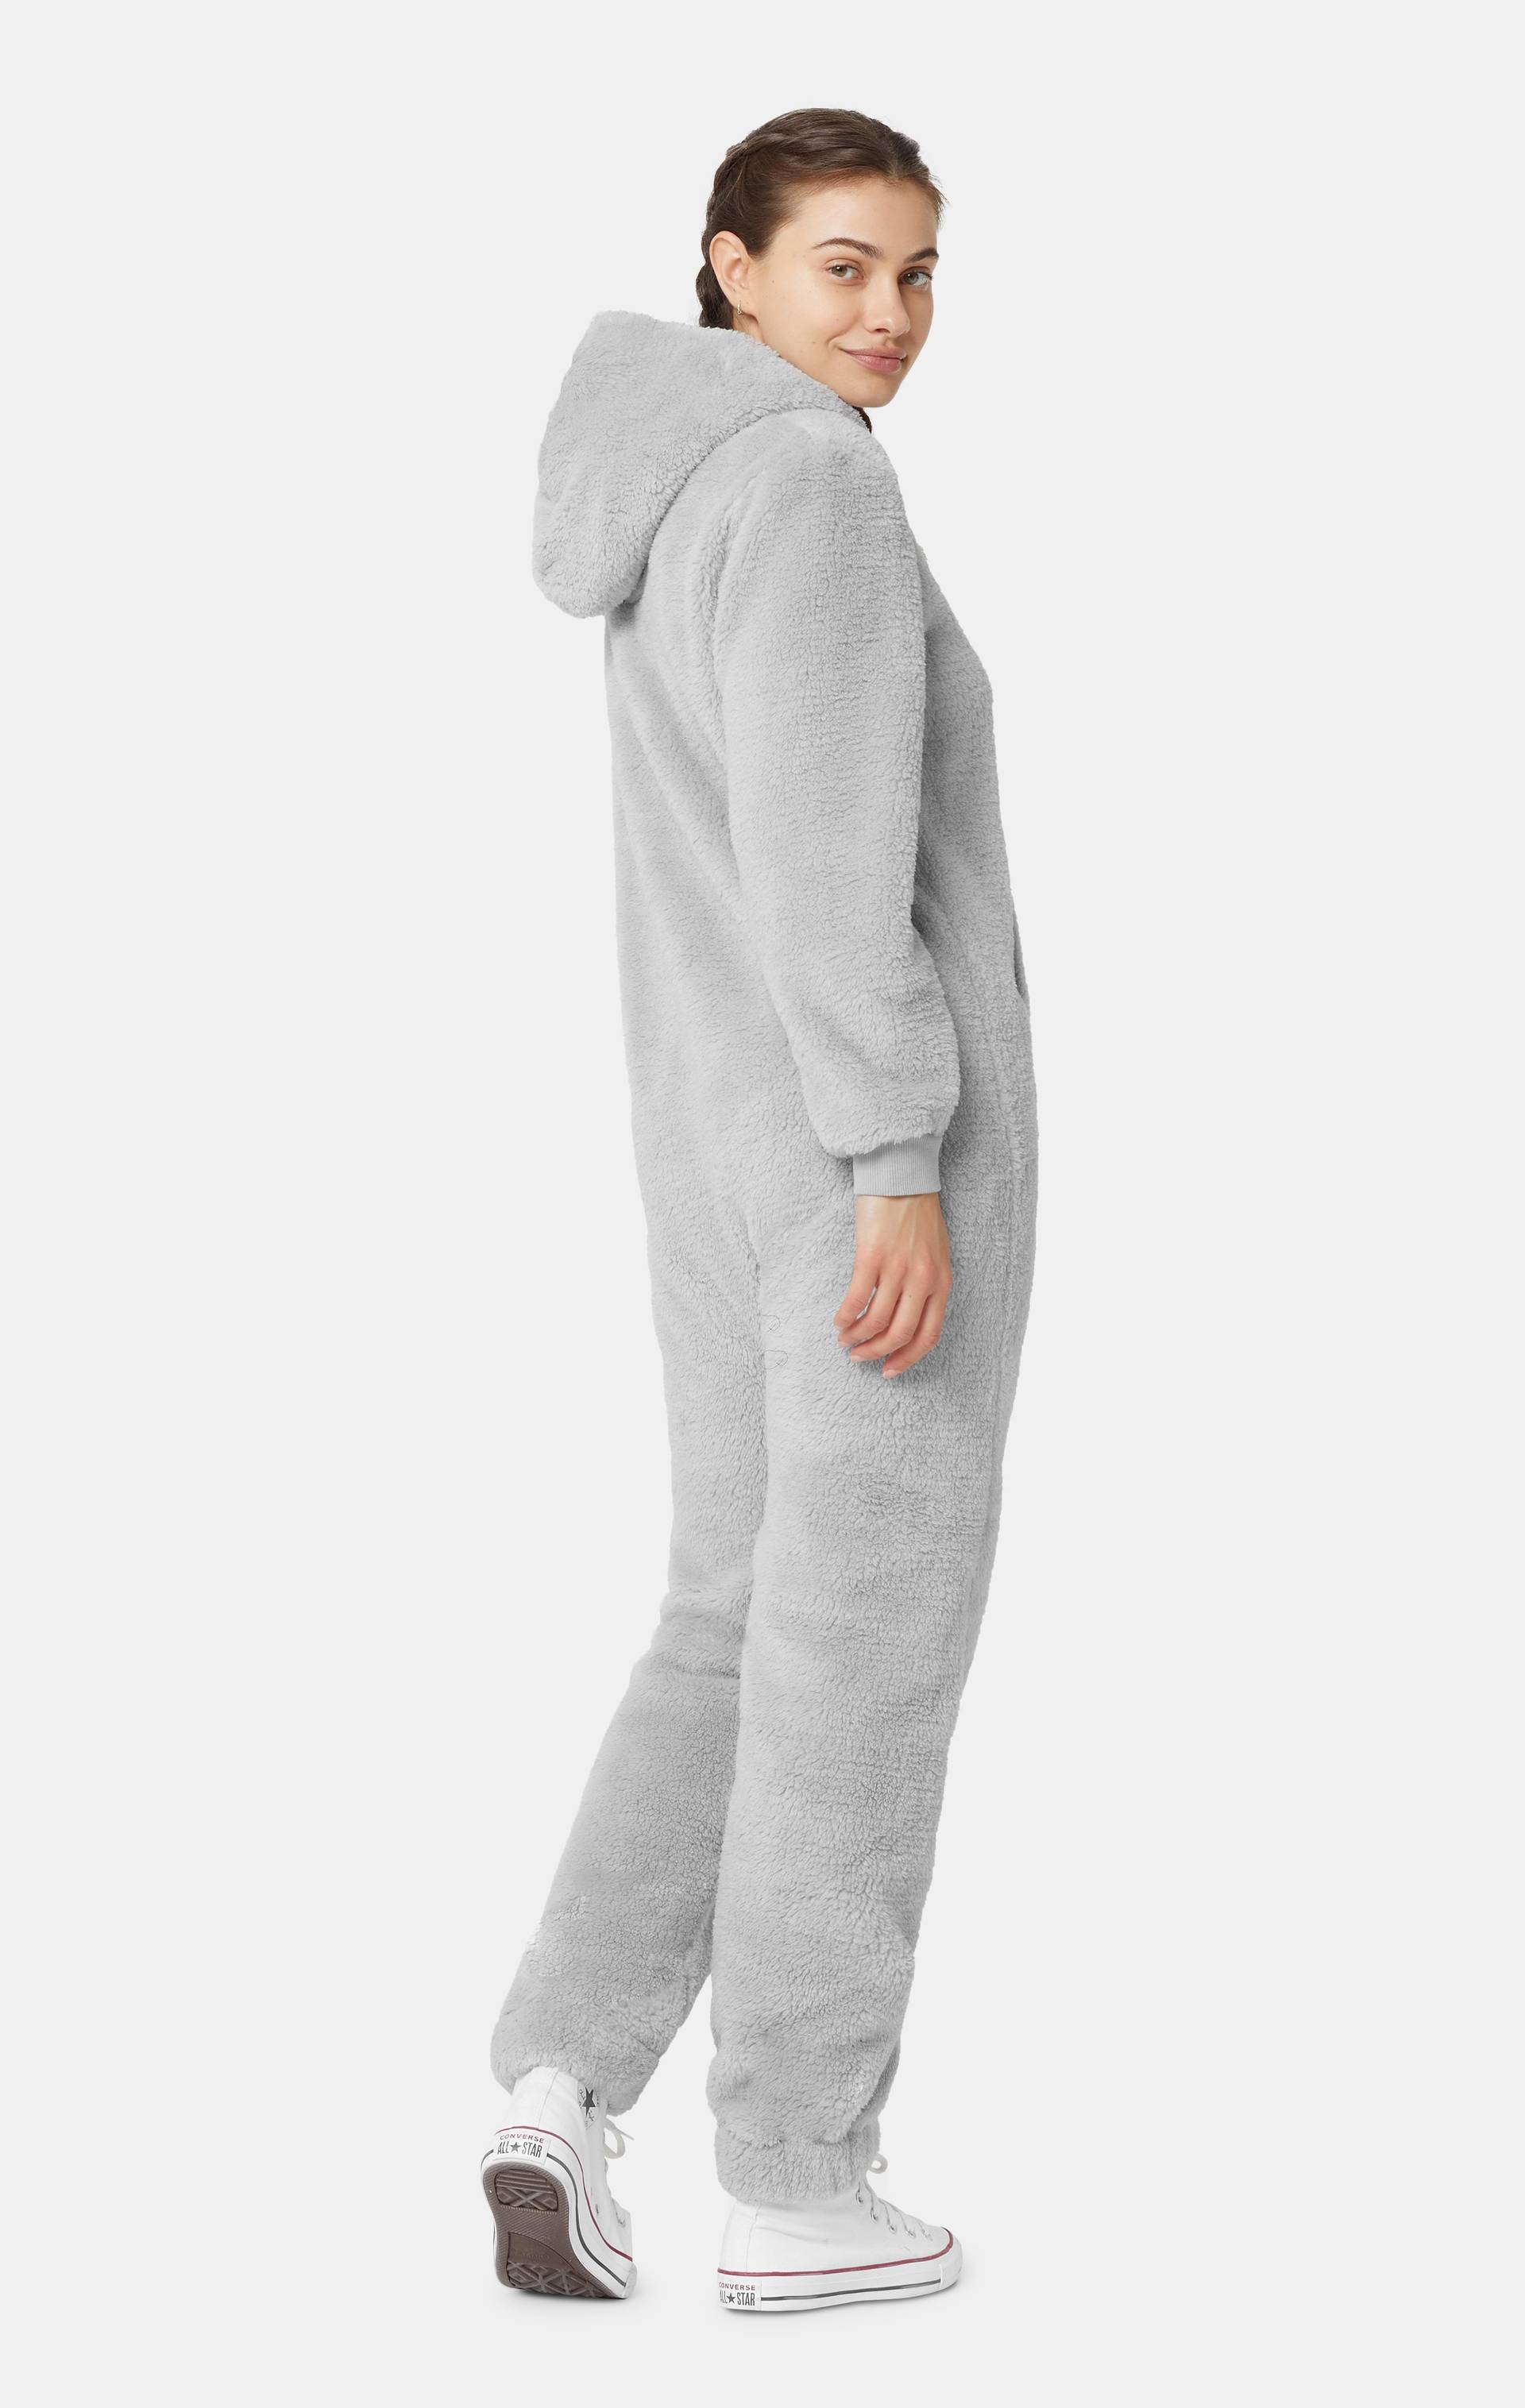 Onepiece The Puppy Jumpsuit Light Grey - 11